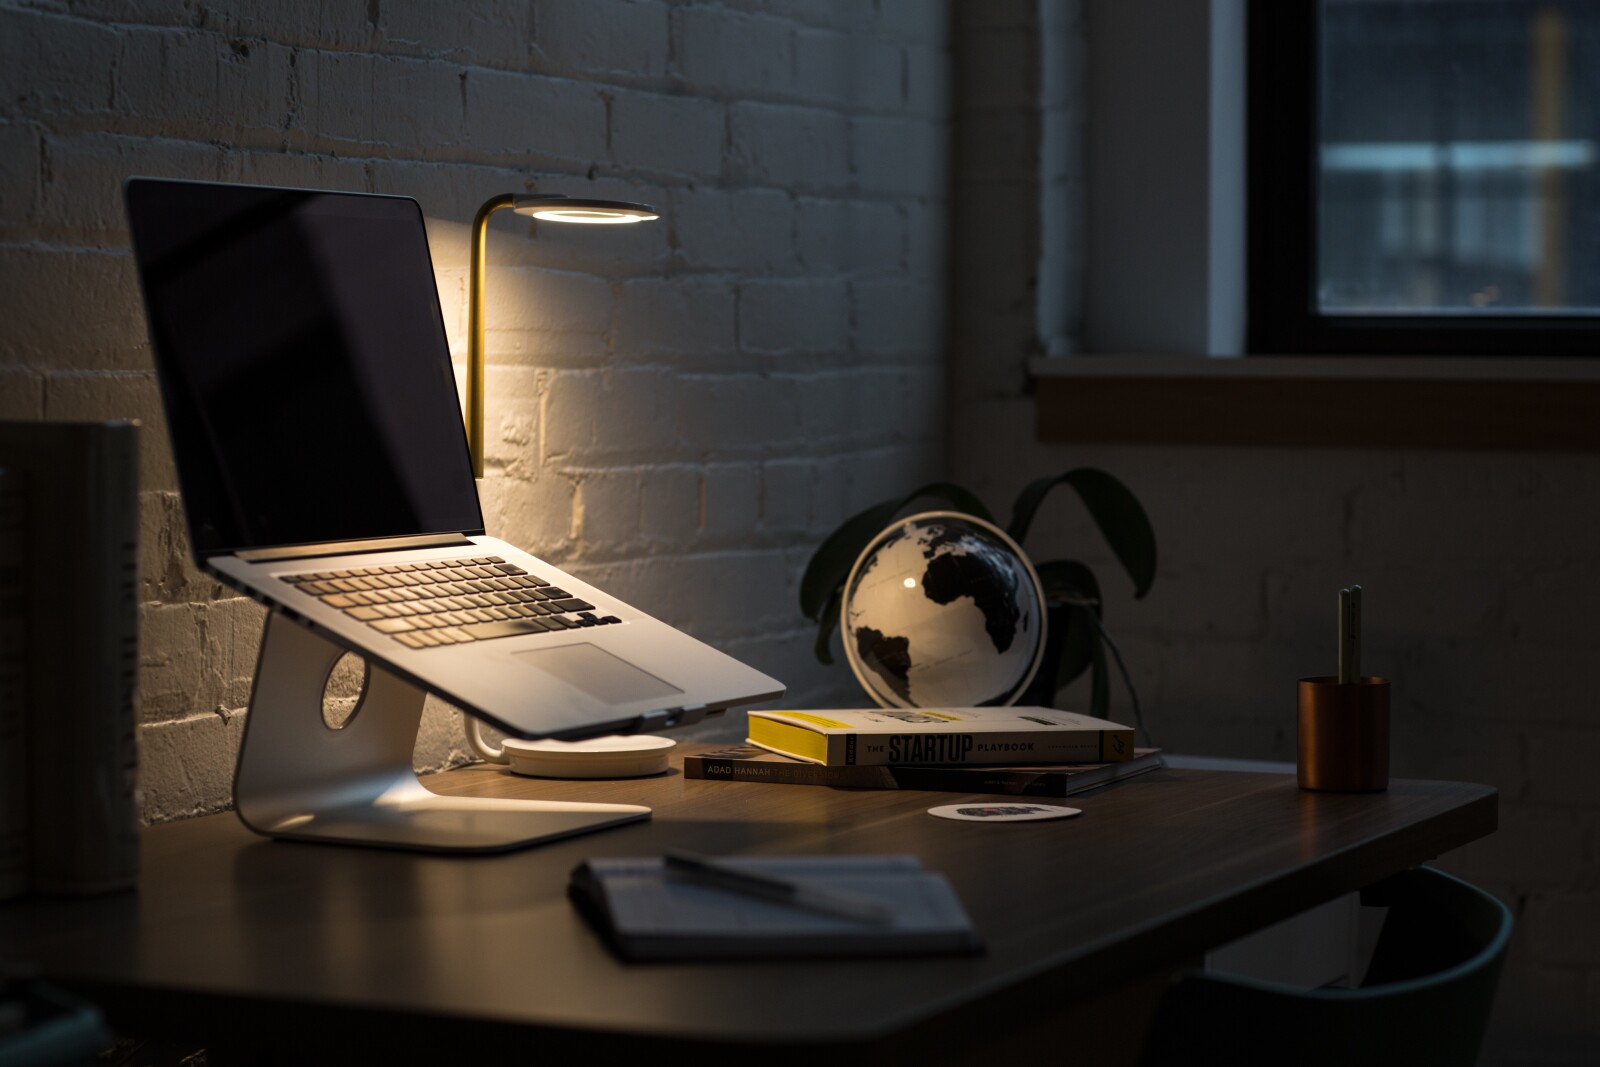 Desk Lamps What You Need to Consider Before Buying